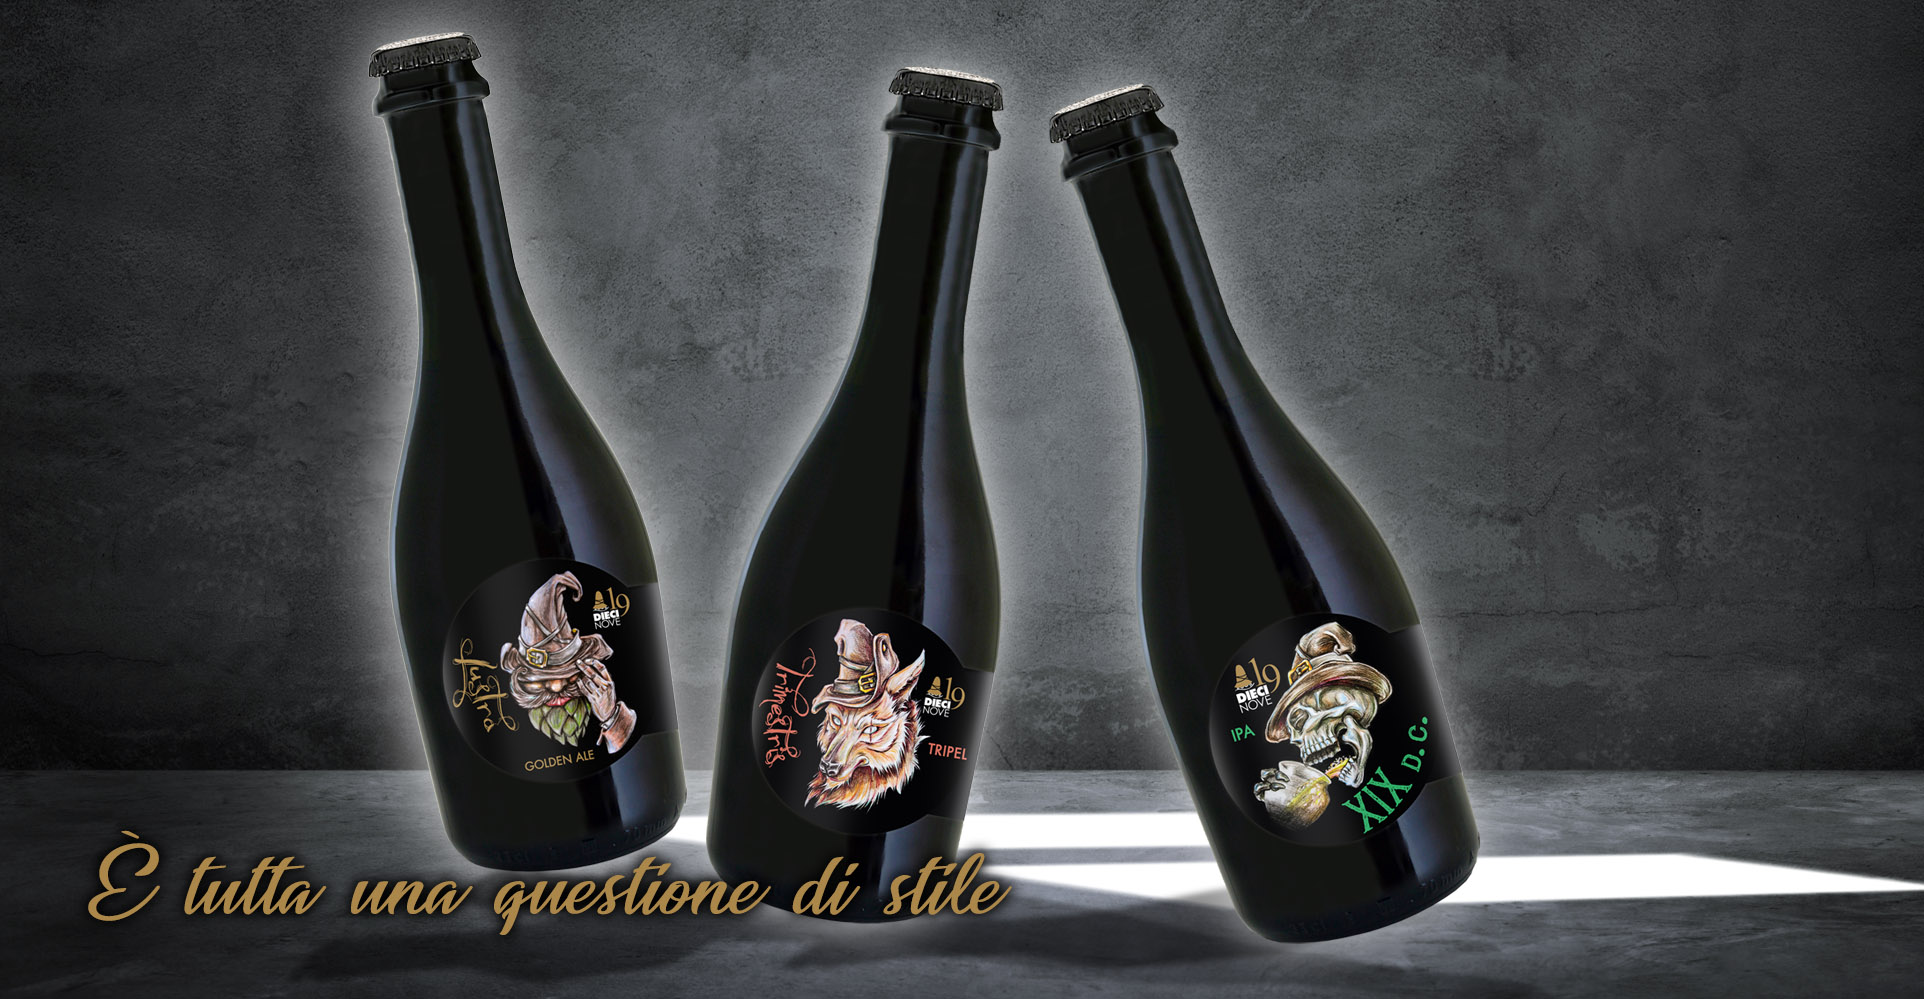 Dieci Nove Artisanal Beer it is all a question of style